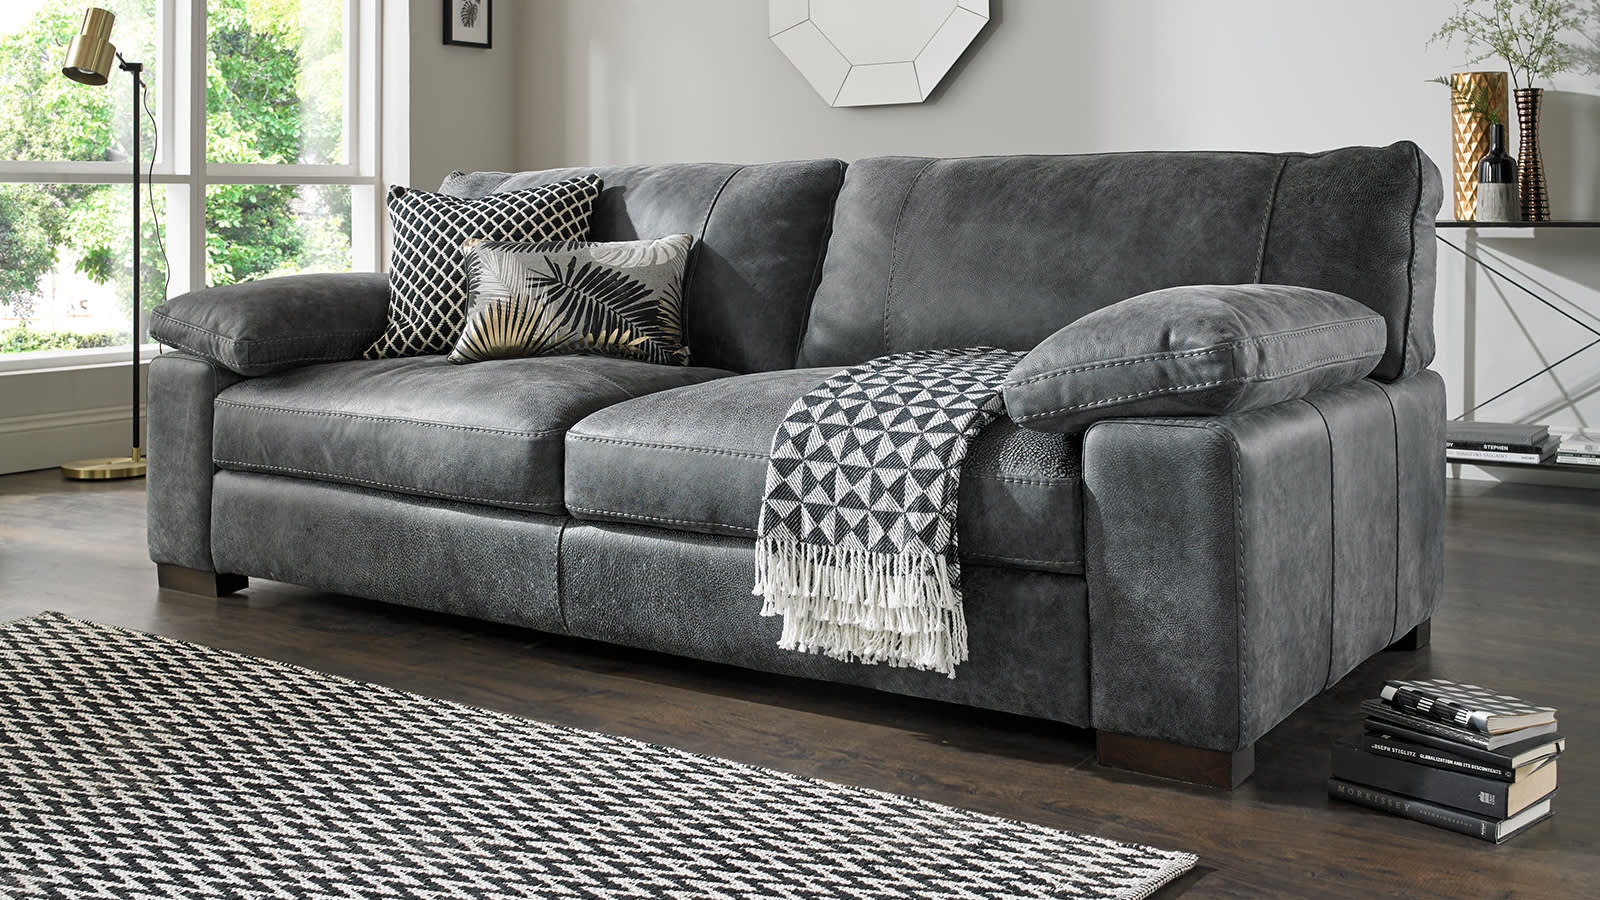 Leather Sofas Corners And Chairs Sofology with Low Leather Sofa